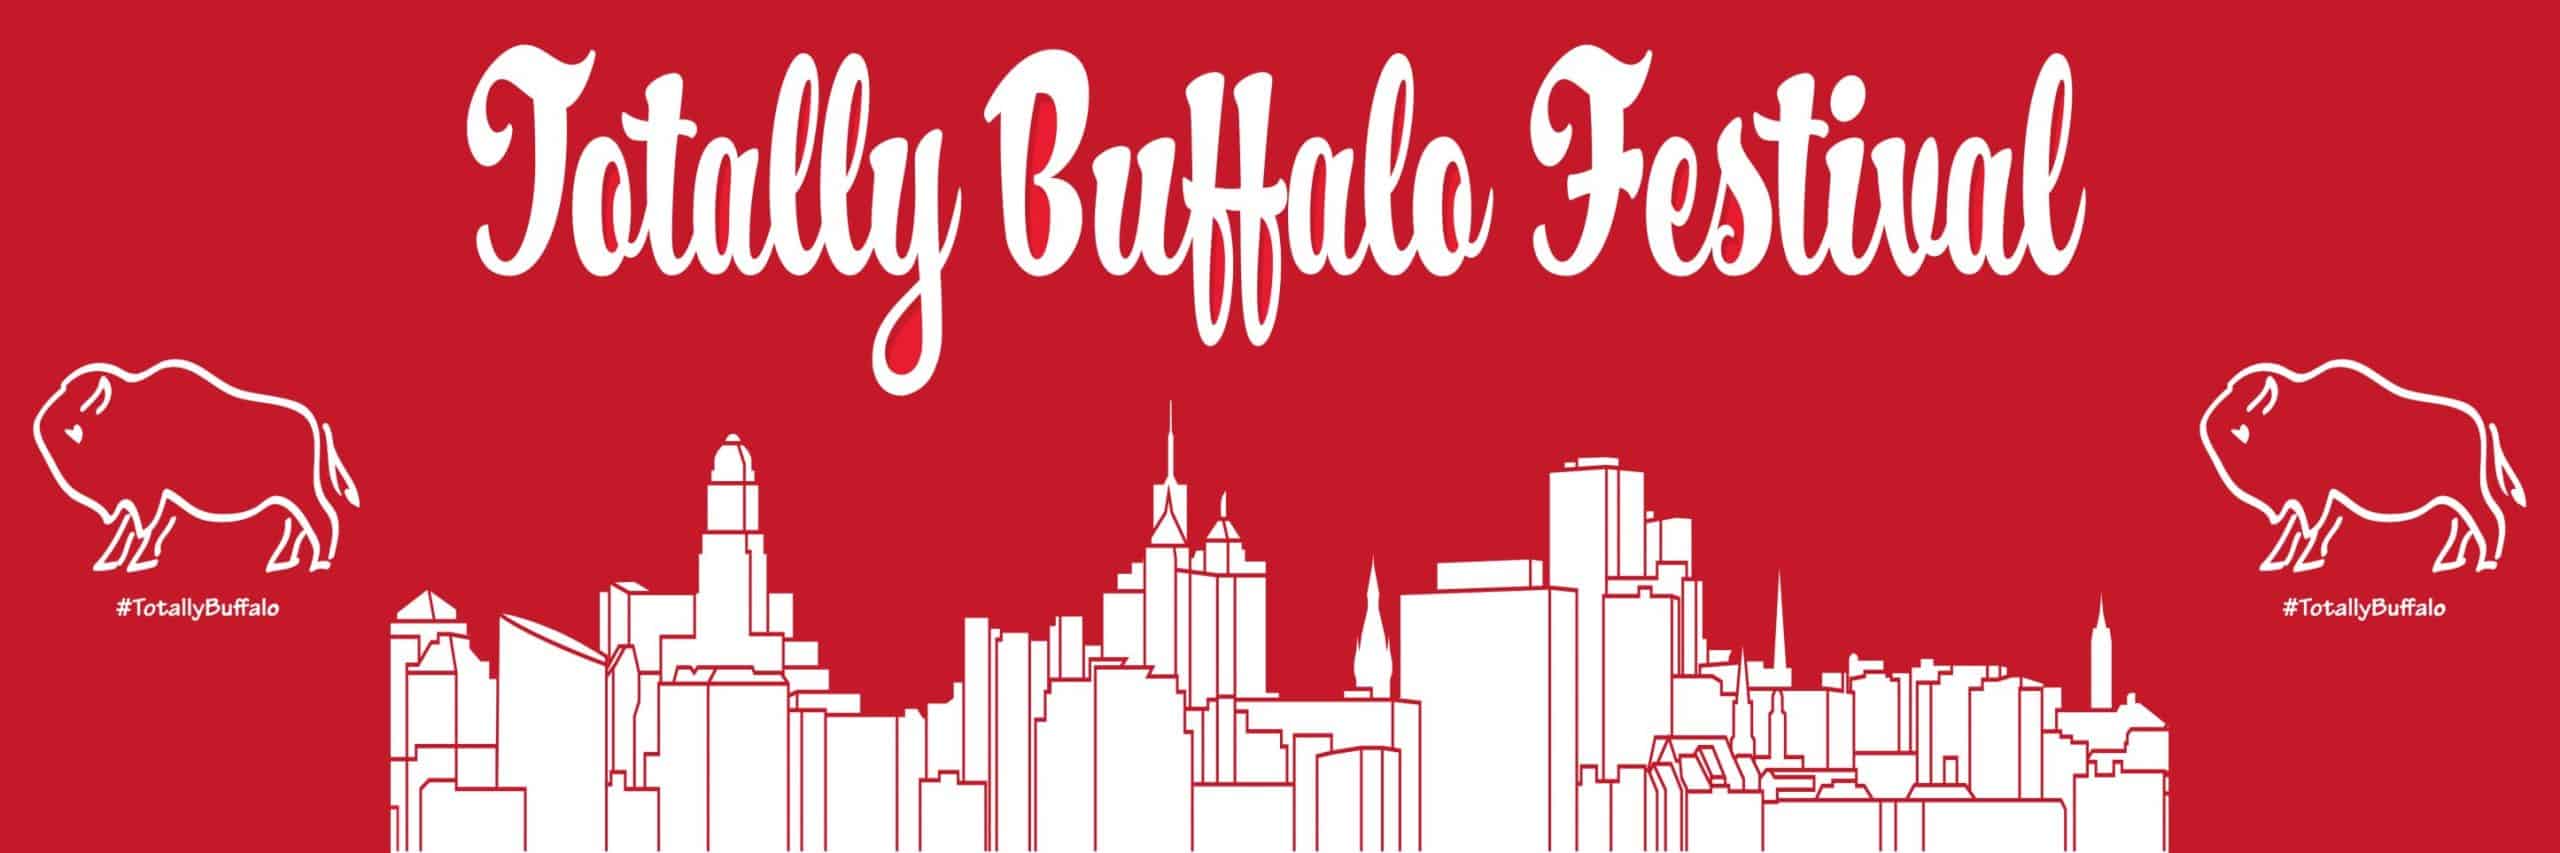 Get ready for the 2nd annual Totally Buffalo Festival – Of course we’re doing it again!